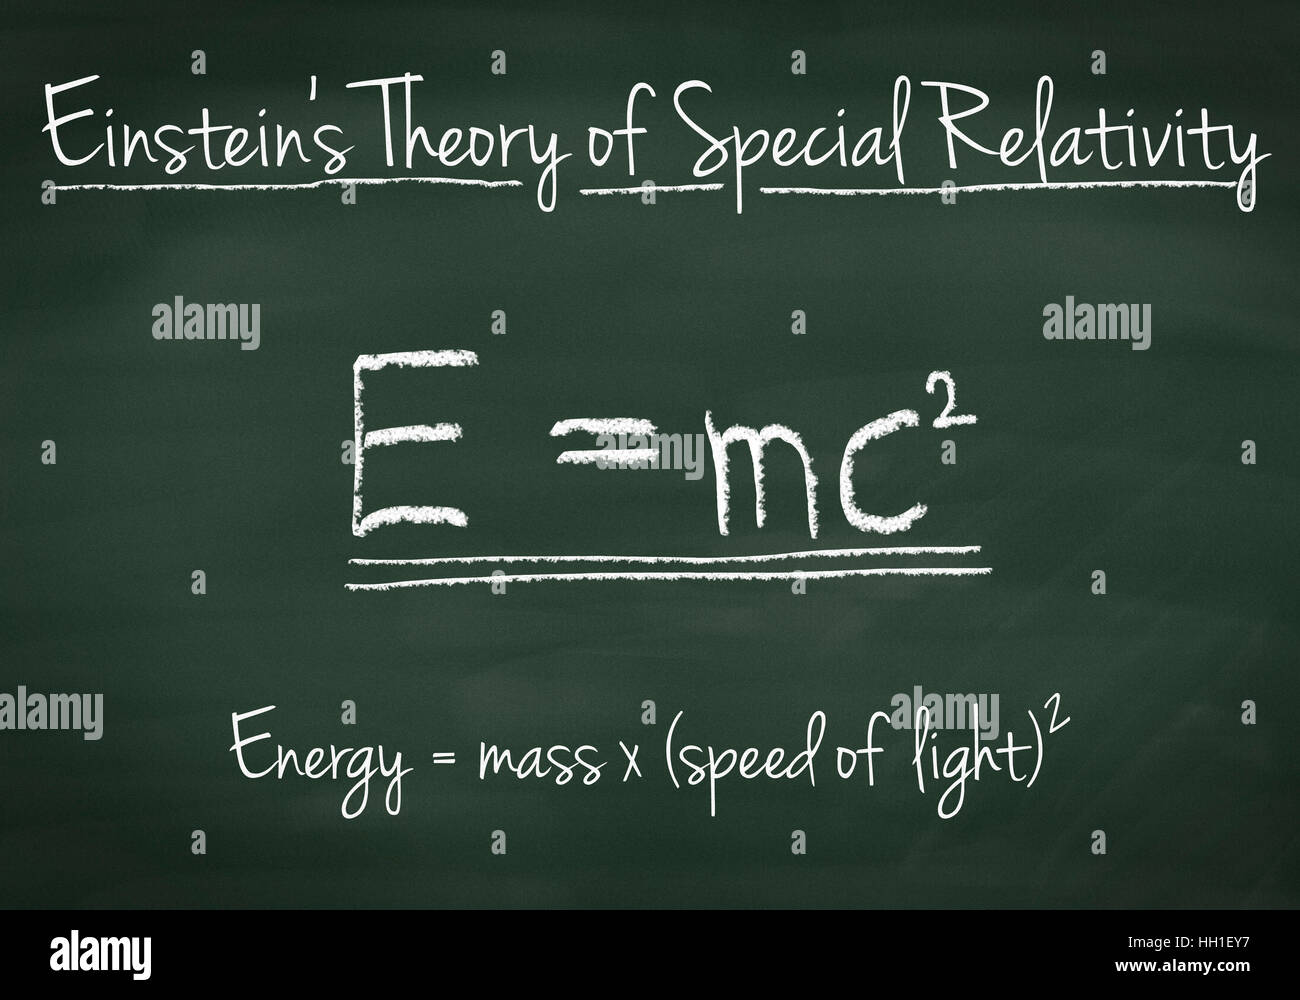 einsteins theory of special relativity explained on a chalkboard HH1EY7